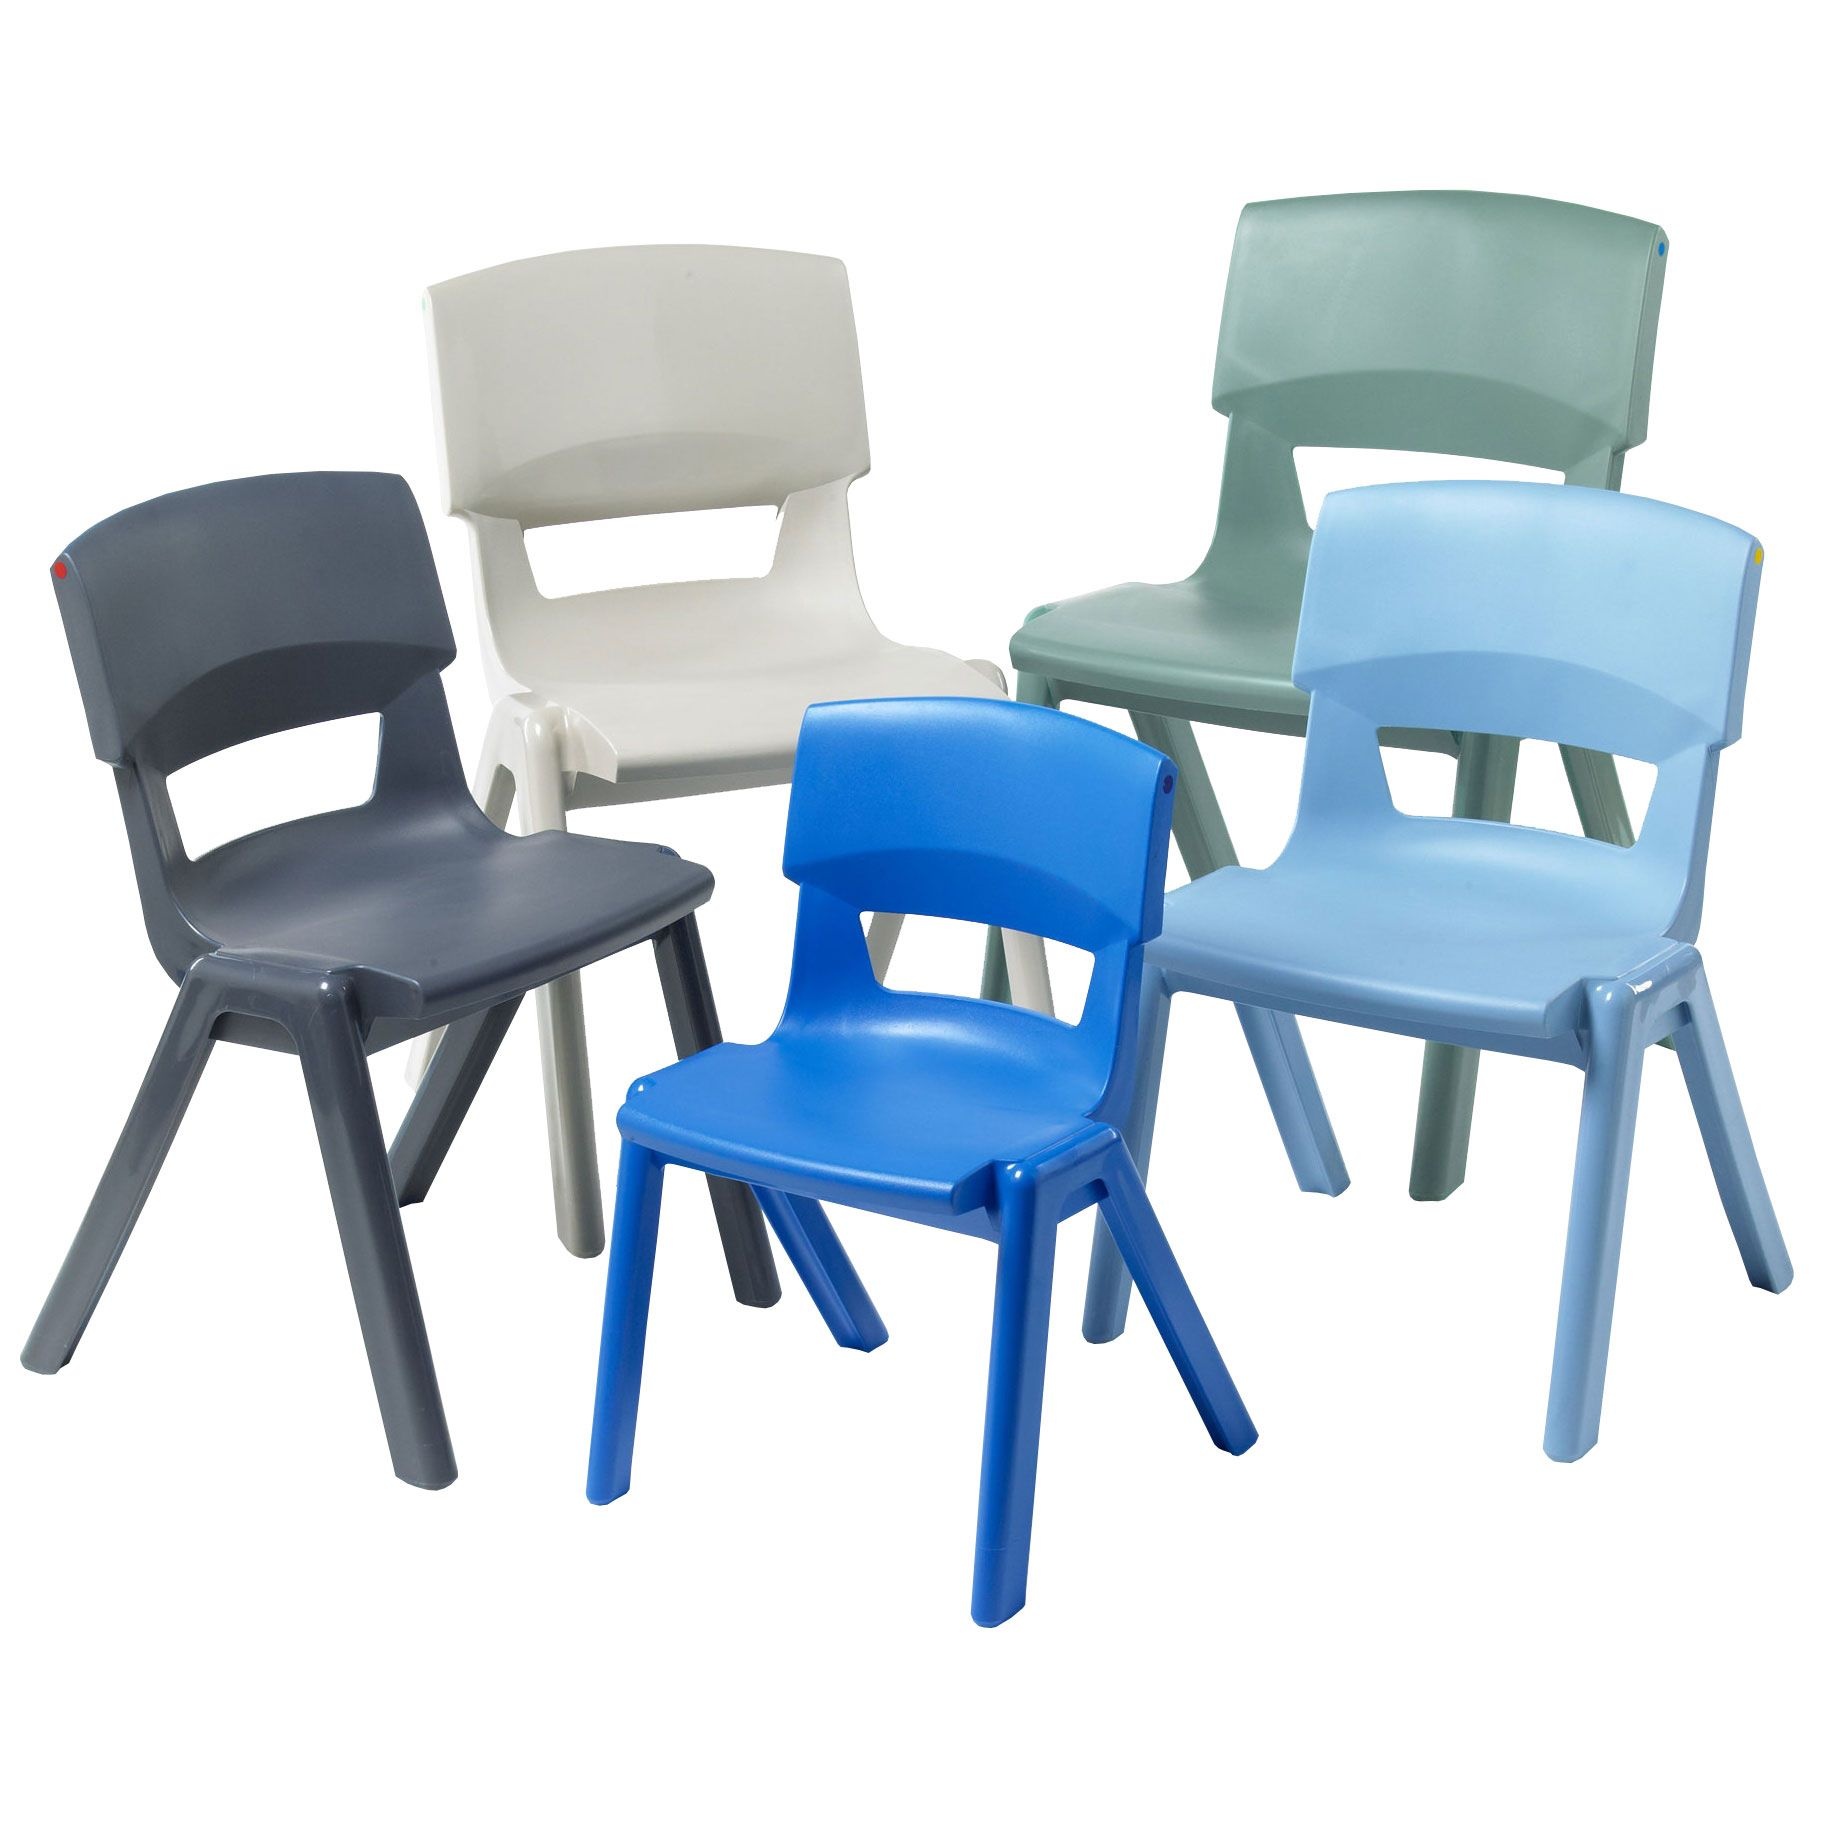 Chairs Postura Plus Classroom Chairs - Bulk Buy Offer | Free UK Delivery